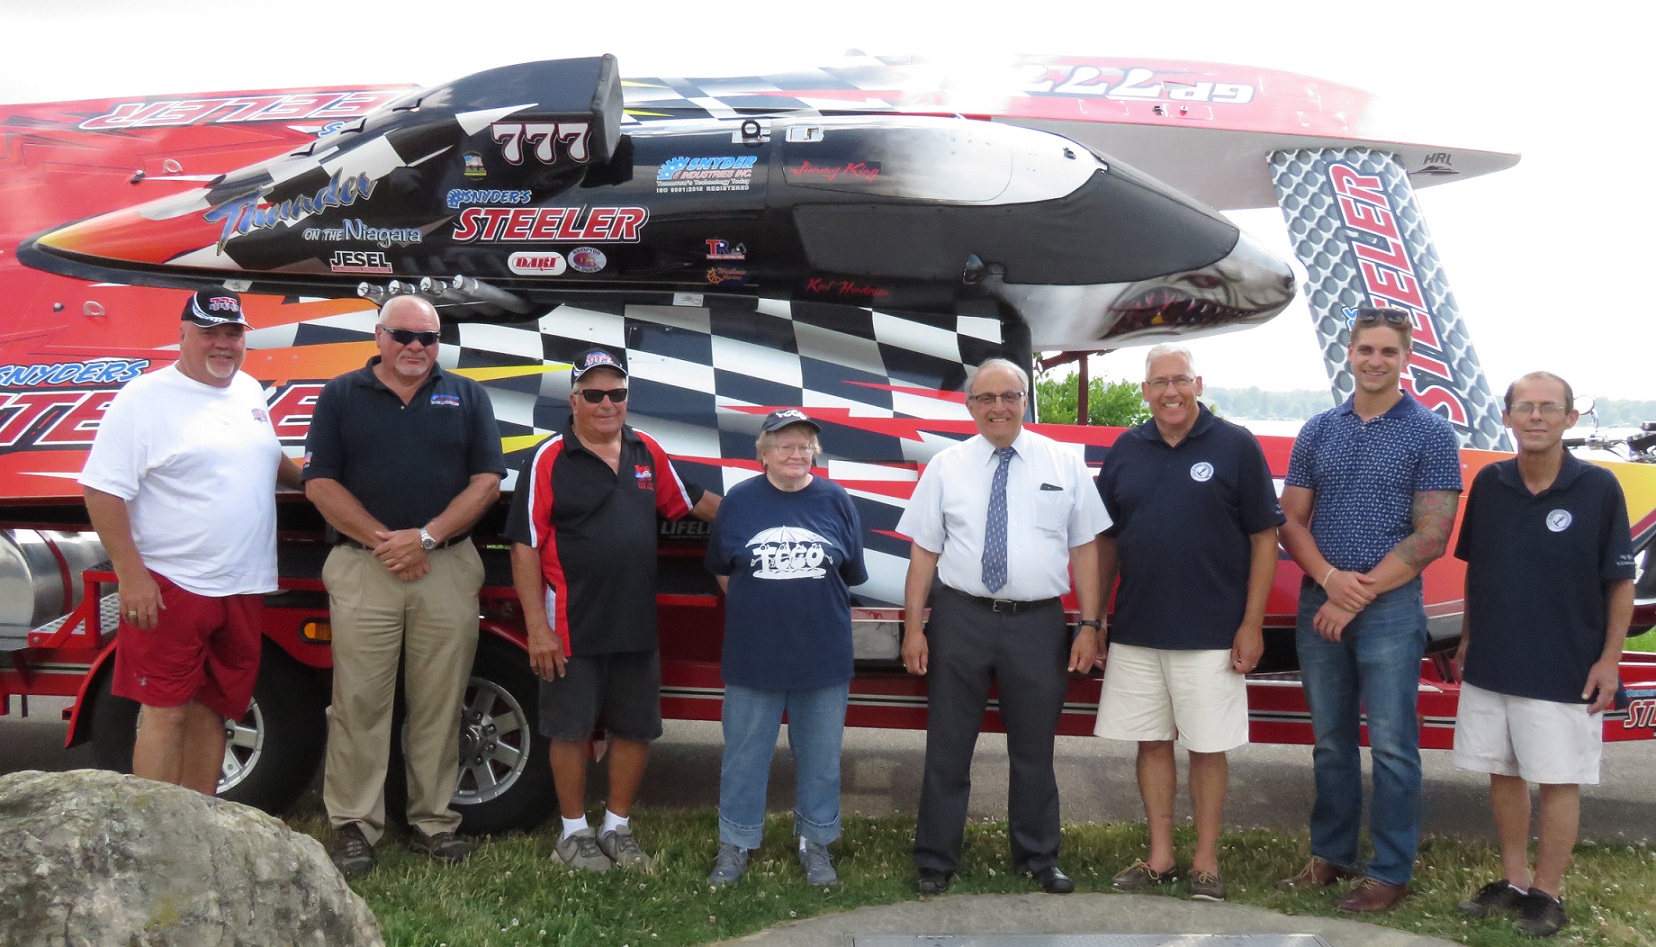 North Tonawanda city officials and Thunder on the Niagara organizers huddle for group photo following Thursday's press conference at Gratwick Riverside Park. The Thunder on the Niagara boat racing event will occur Saturday and Sunday, Aug. 3 and 4 at Gratwick Park. (Photos by David Yarger)